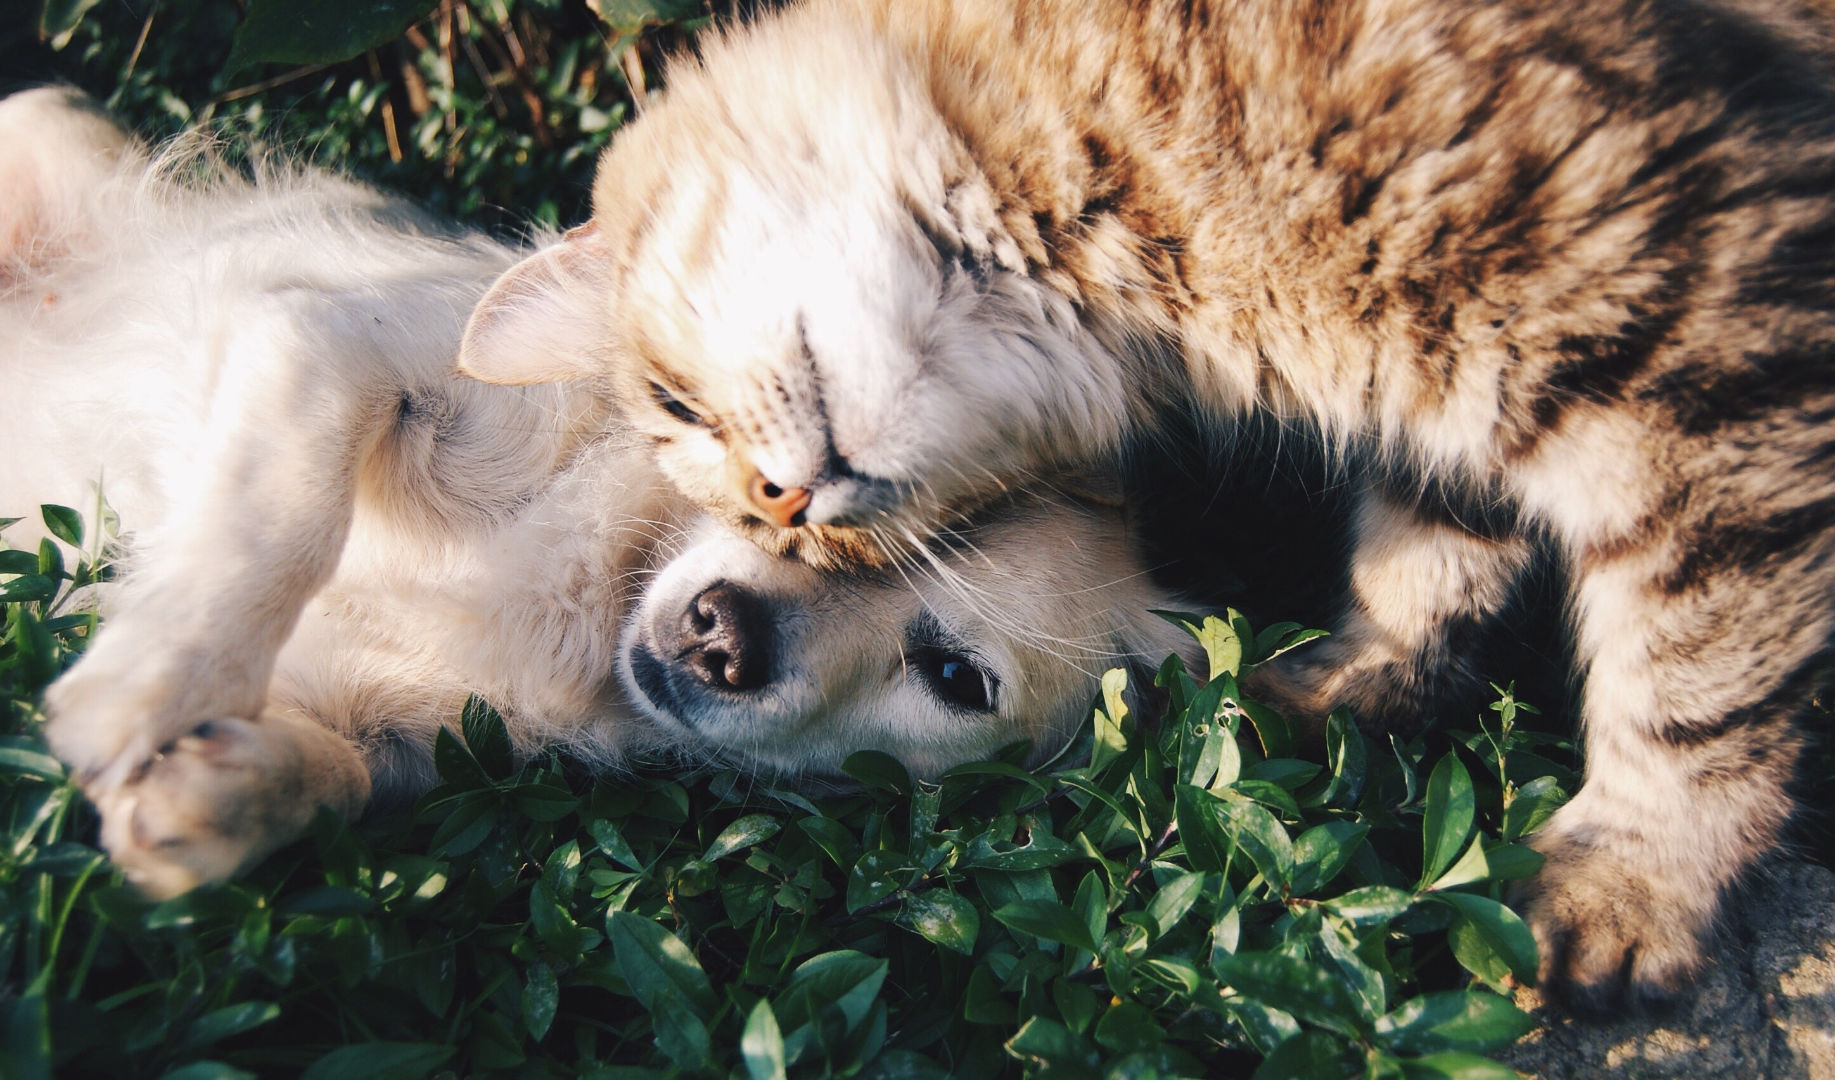 Cat and Dog snuggling, CBD questions in Canada